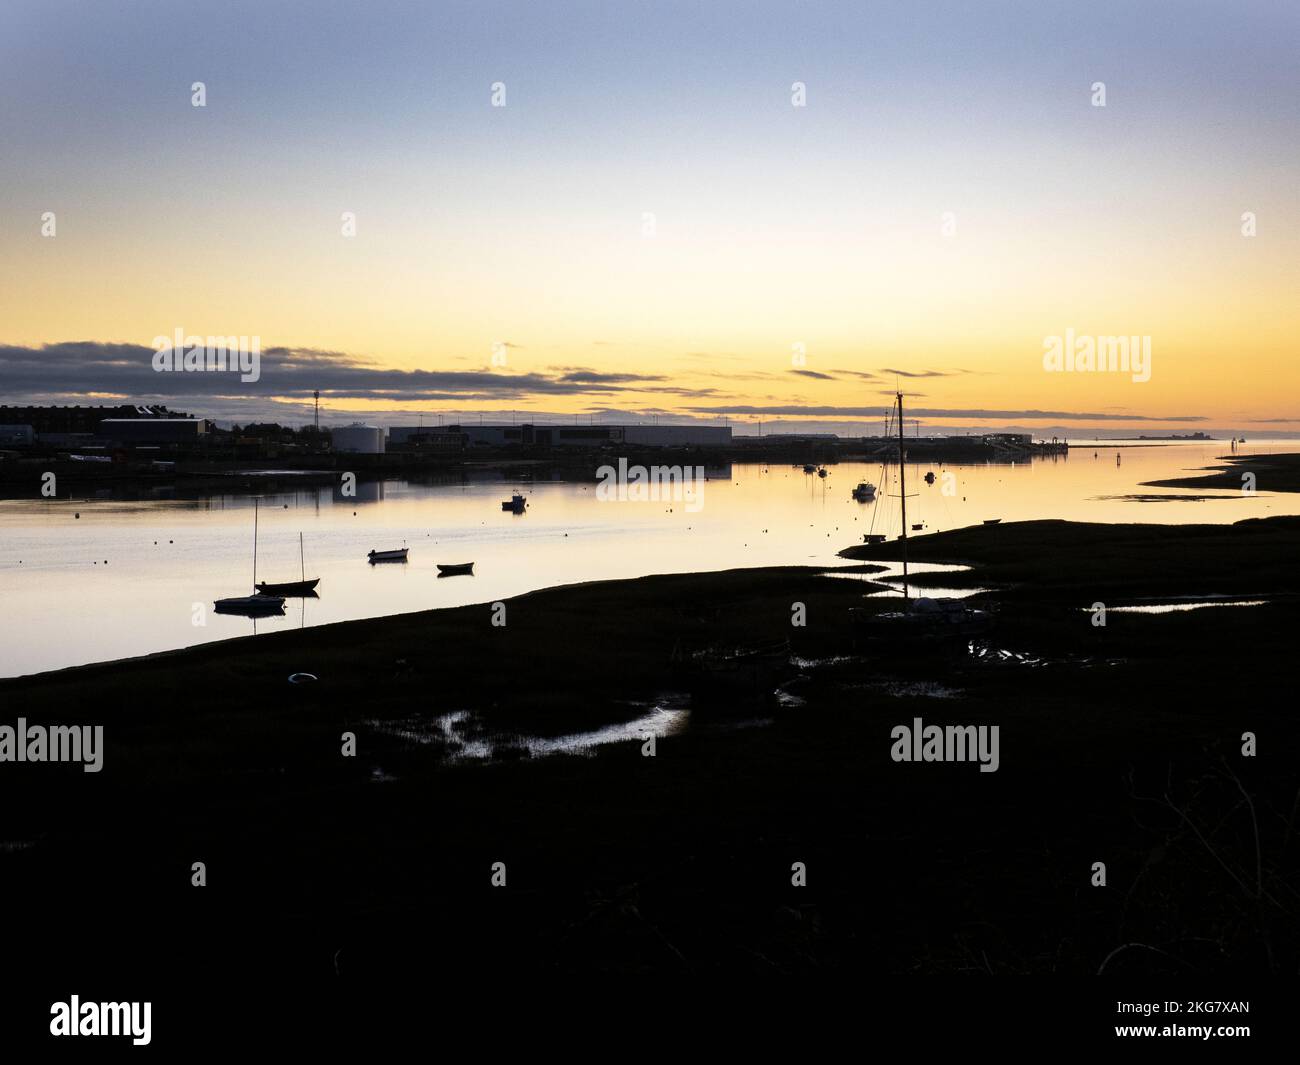 Looking towards Piel Castle and island from the Walney channel at sunrise, Barrow in Fuirness, Cumbria, UK. Stock Photo